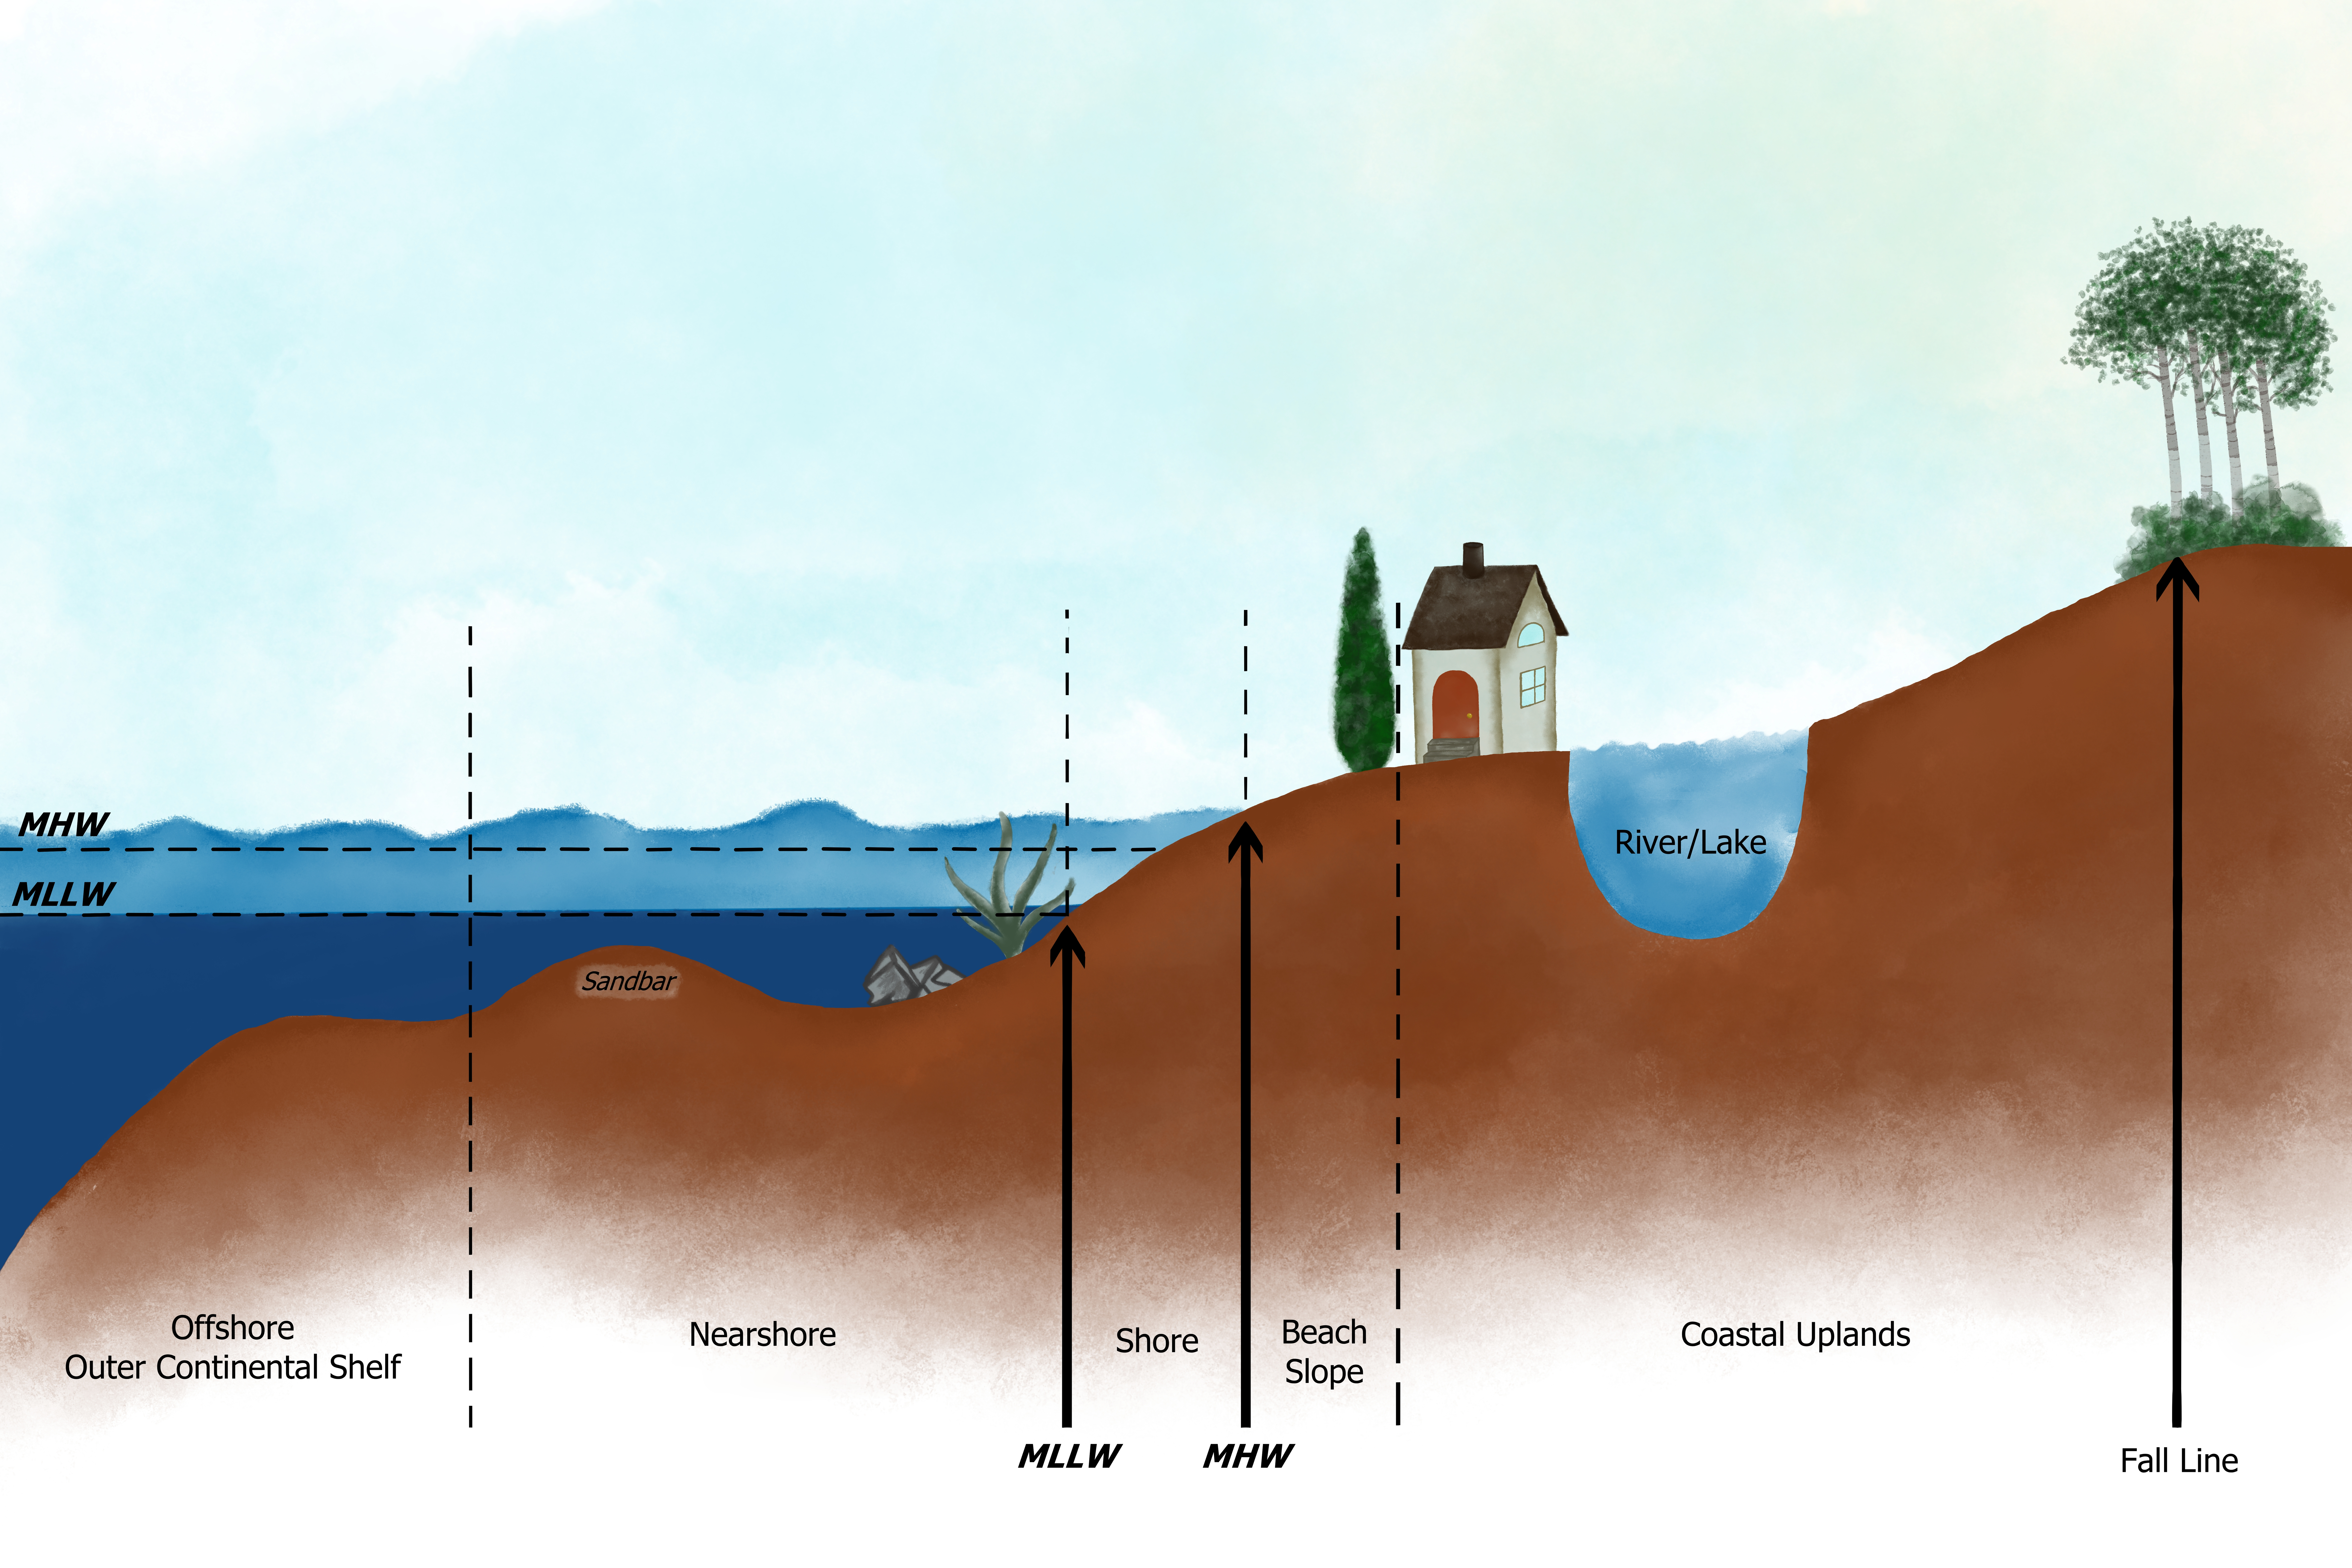 Cross-section diagram showing the relationship between offshore, nearshore, and inland environments.